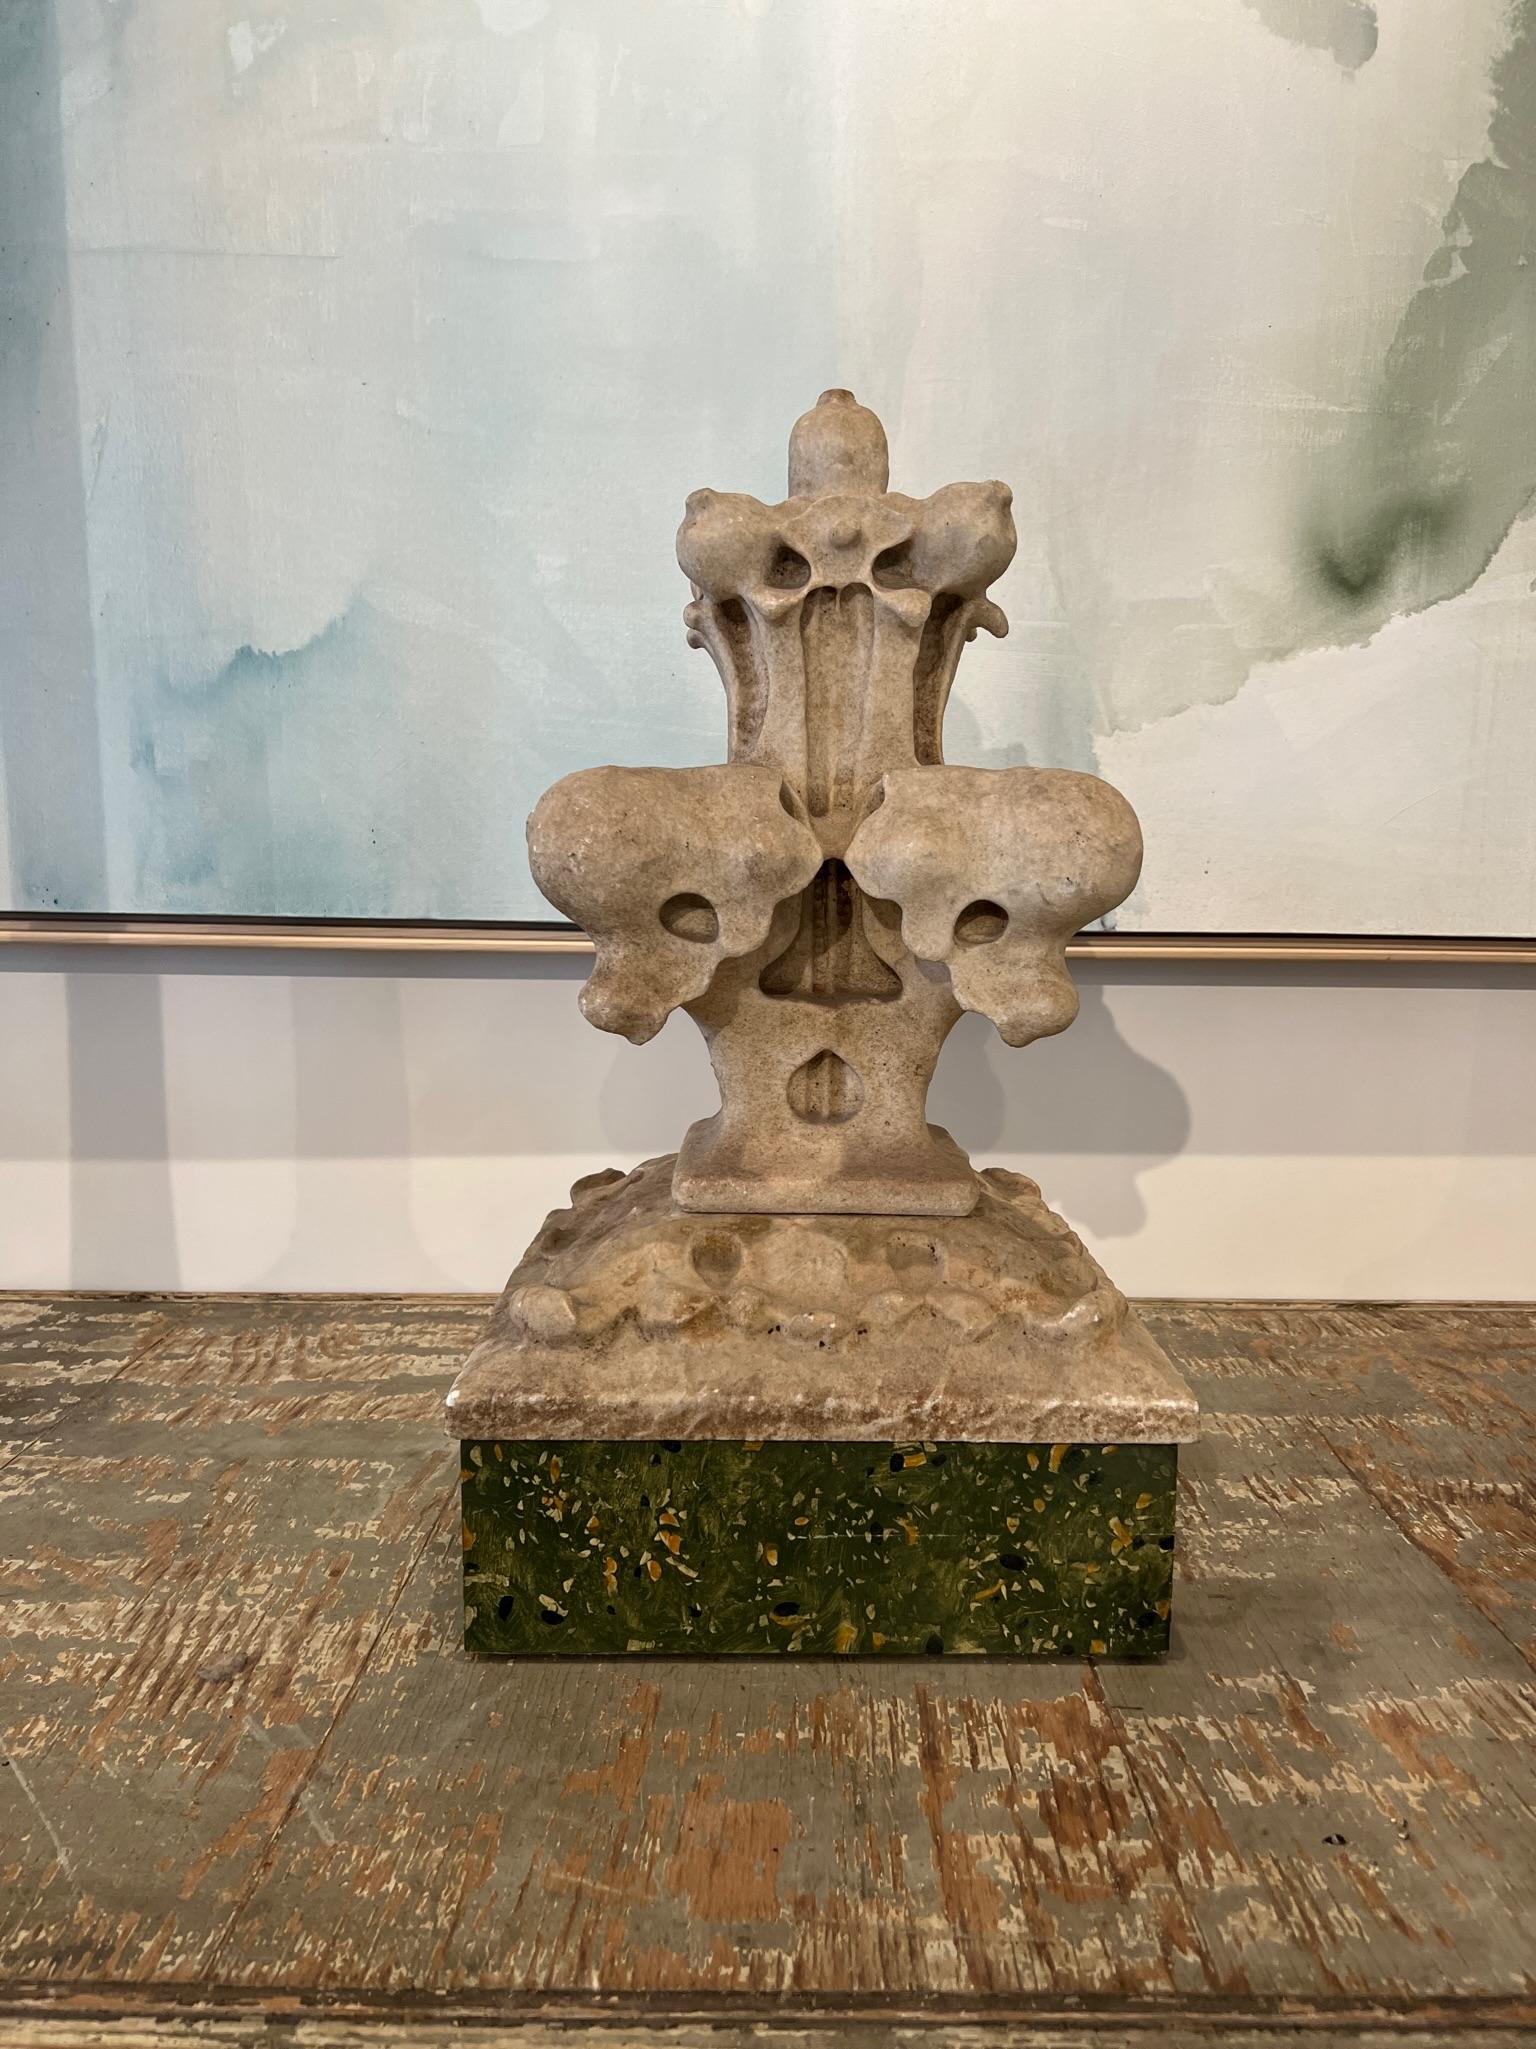 Decorative stone finial in extraordinarily good condition. It is in two pieces which are stacked on a contemporary base. This is the kind of objet d'art that could be combined in a tabletop grouping of singularly.